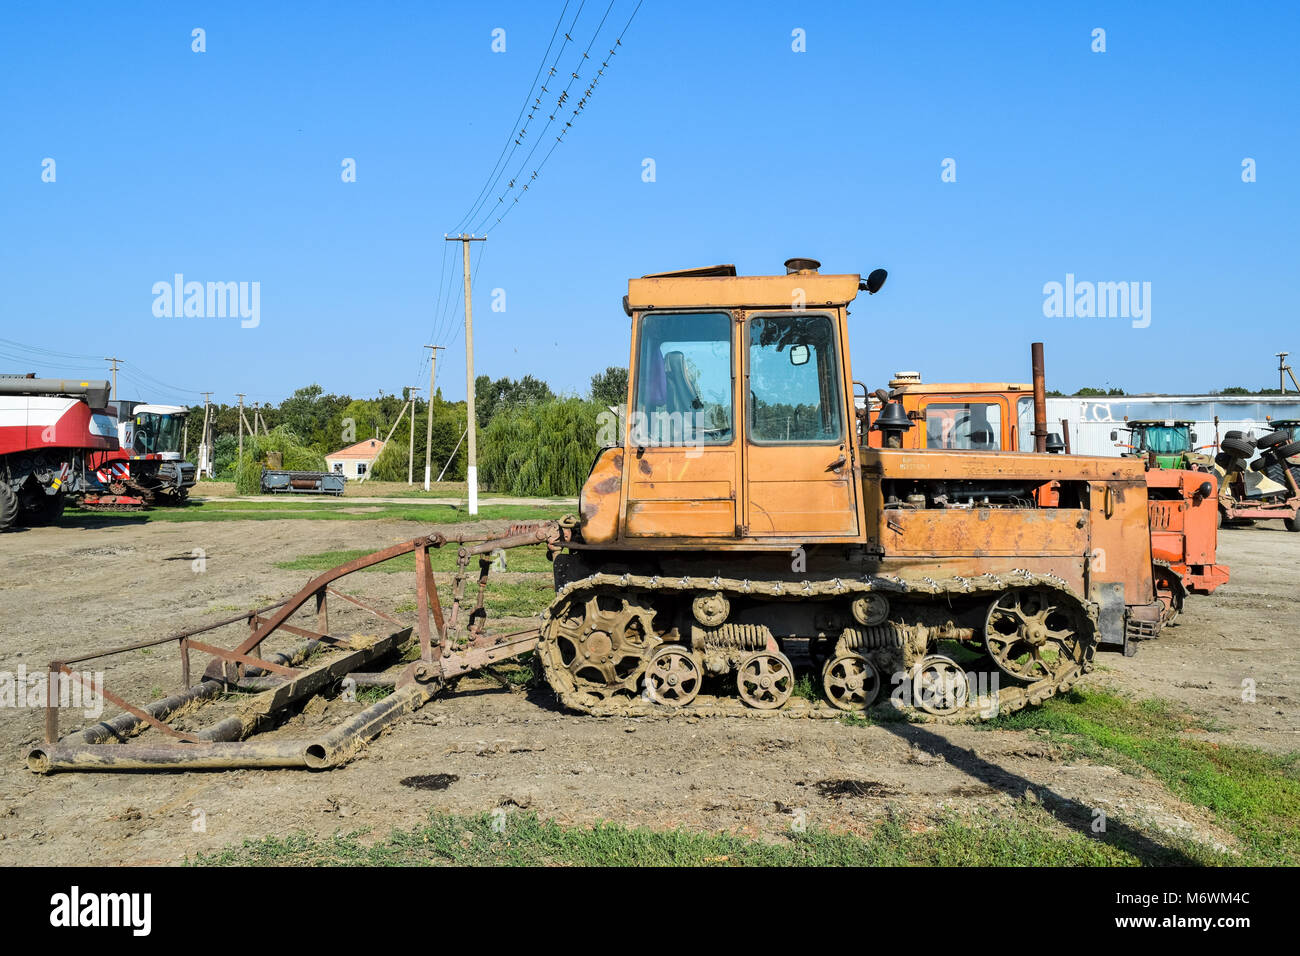 Tractor. Agricultural machinery. Stock Photo